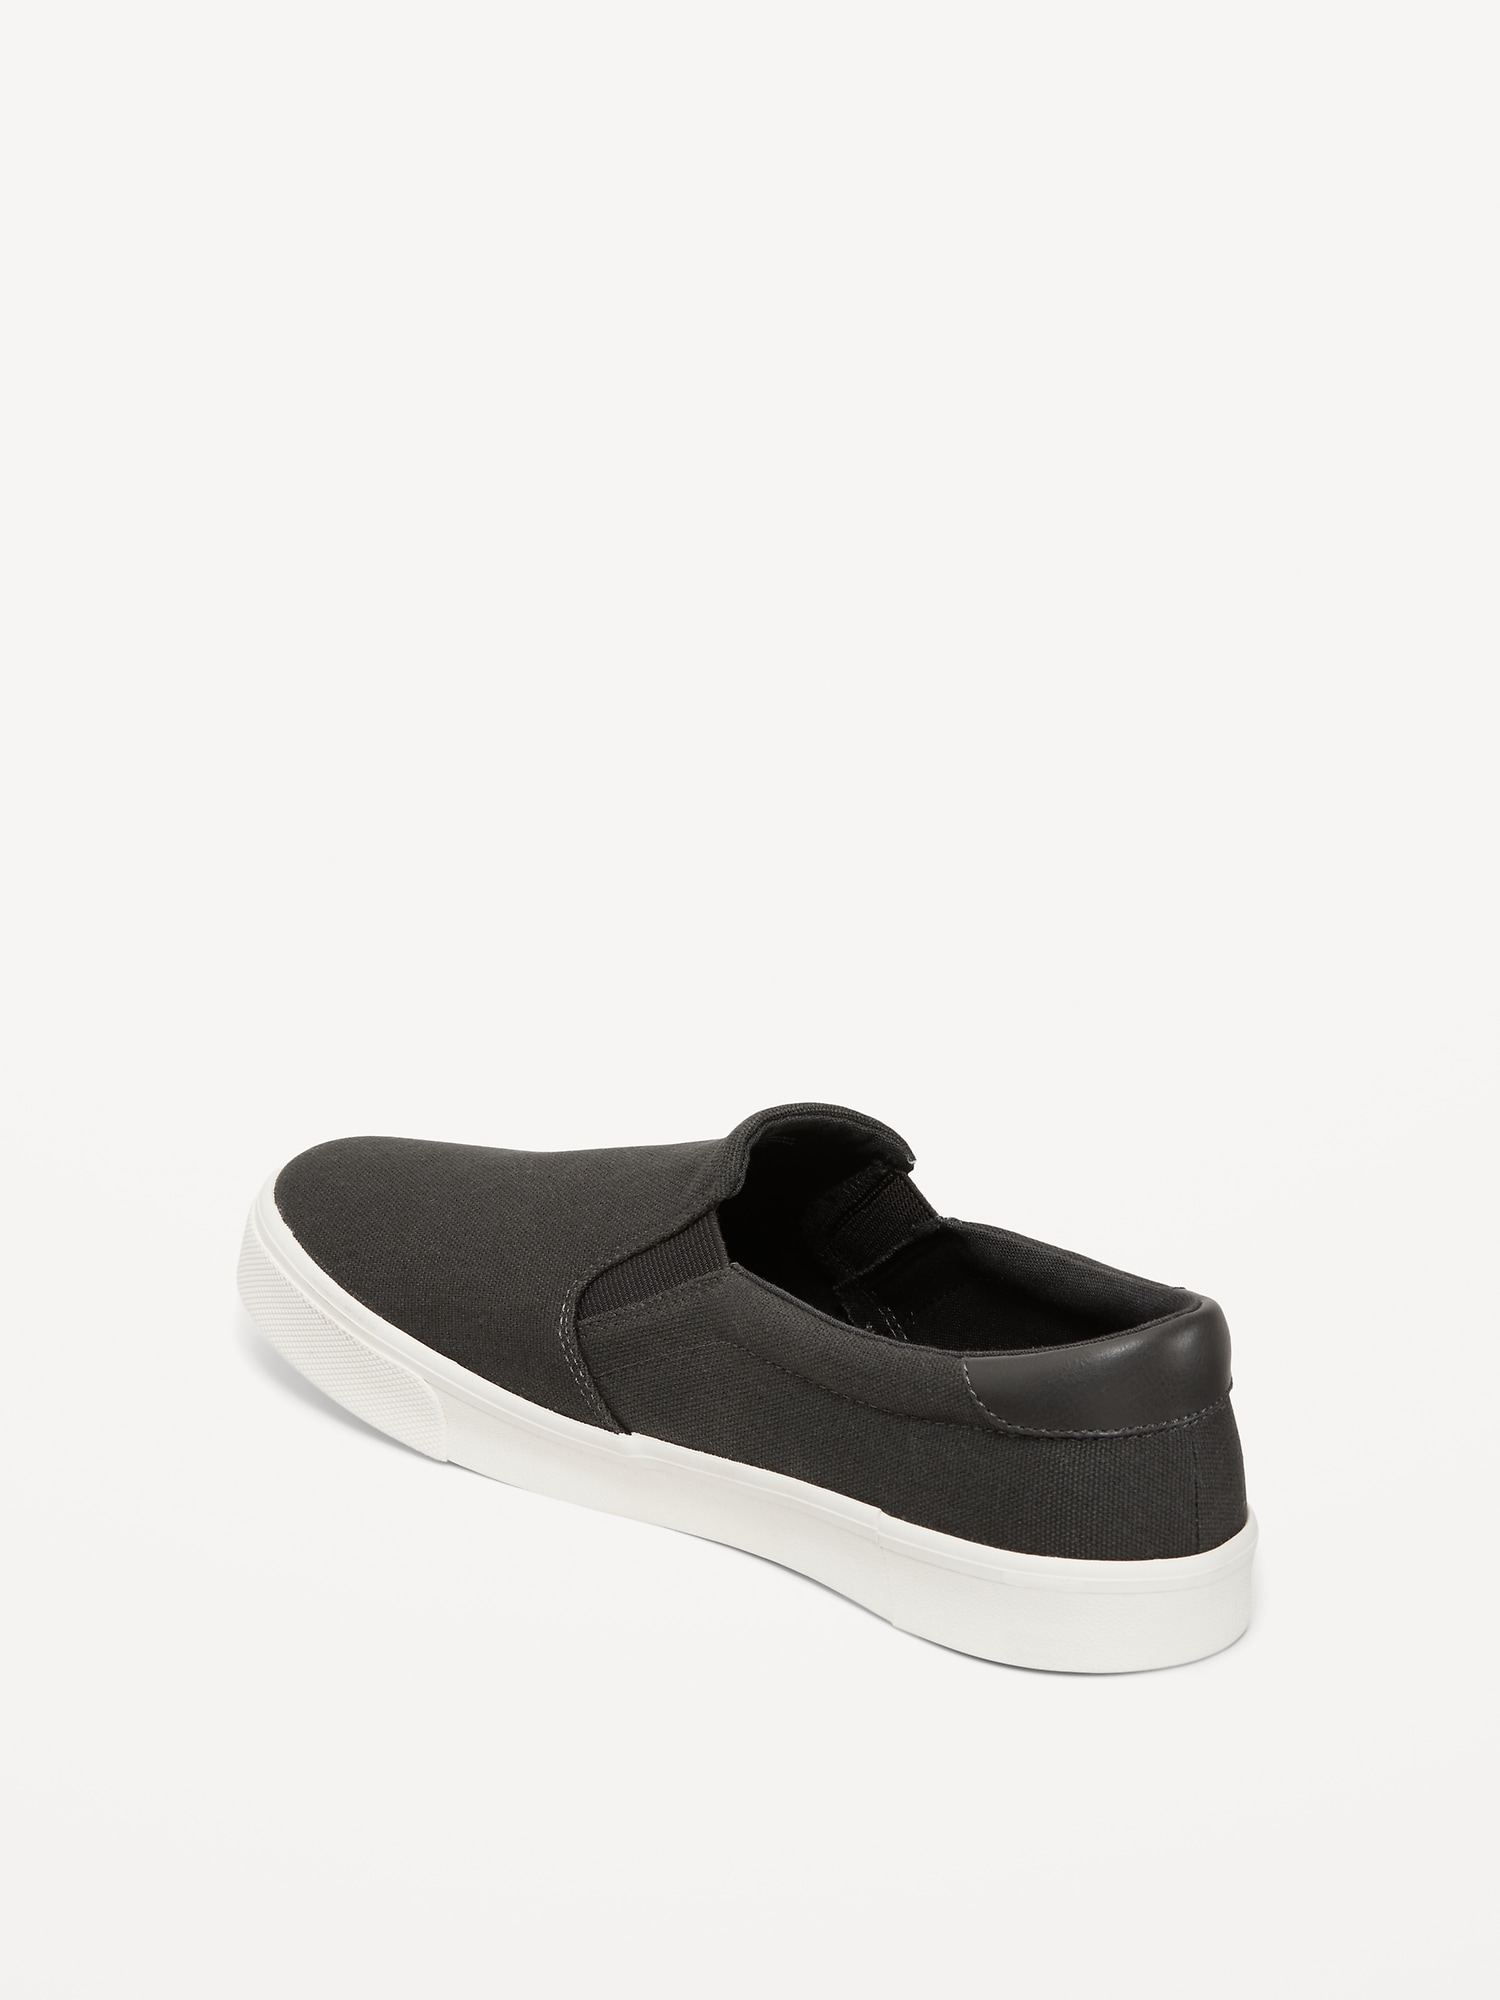 Leather Slip On Sneakers - Delphine le Corre